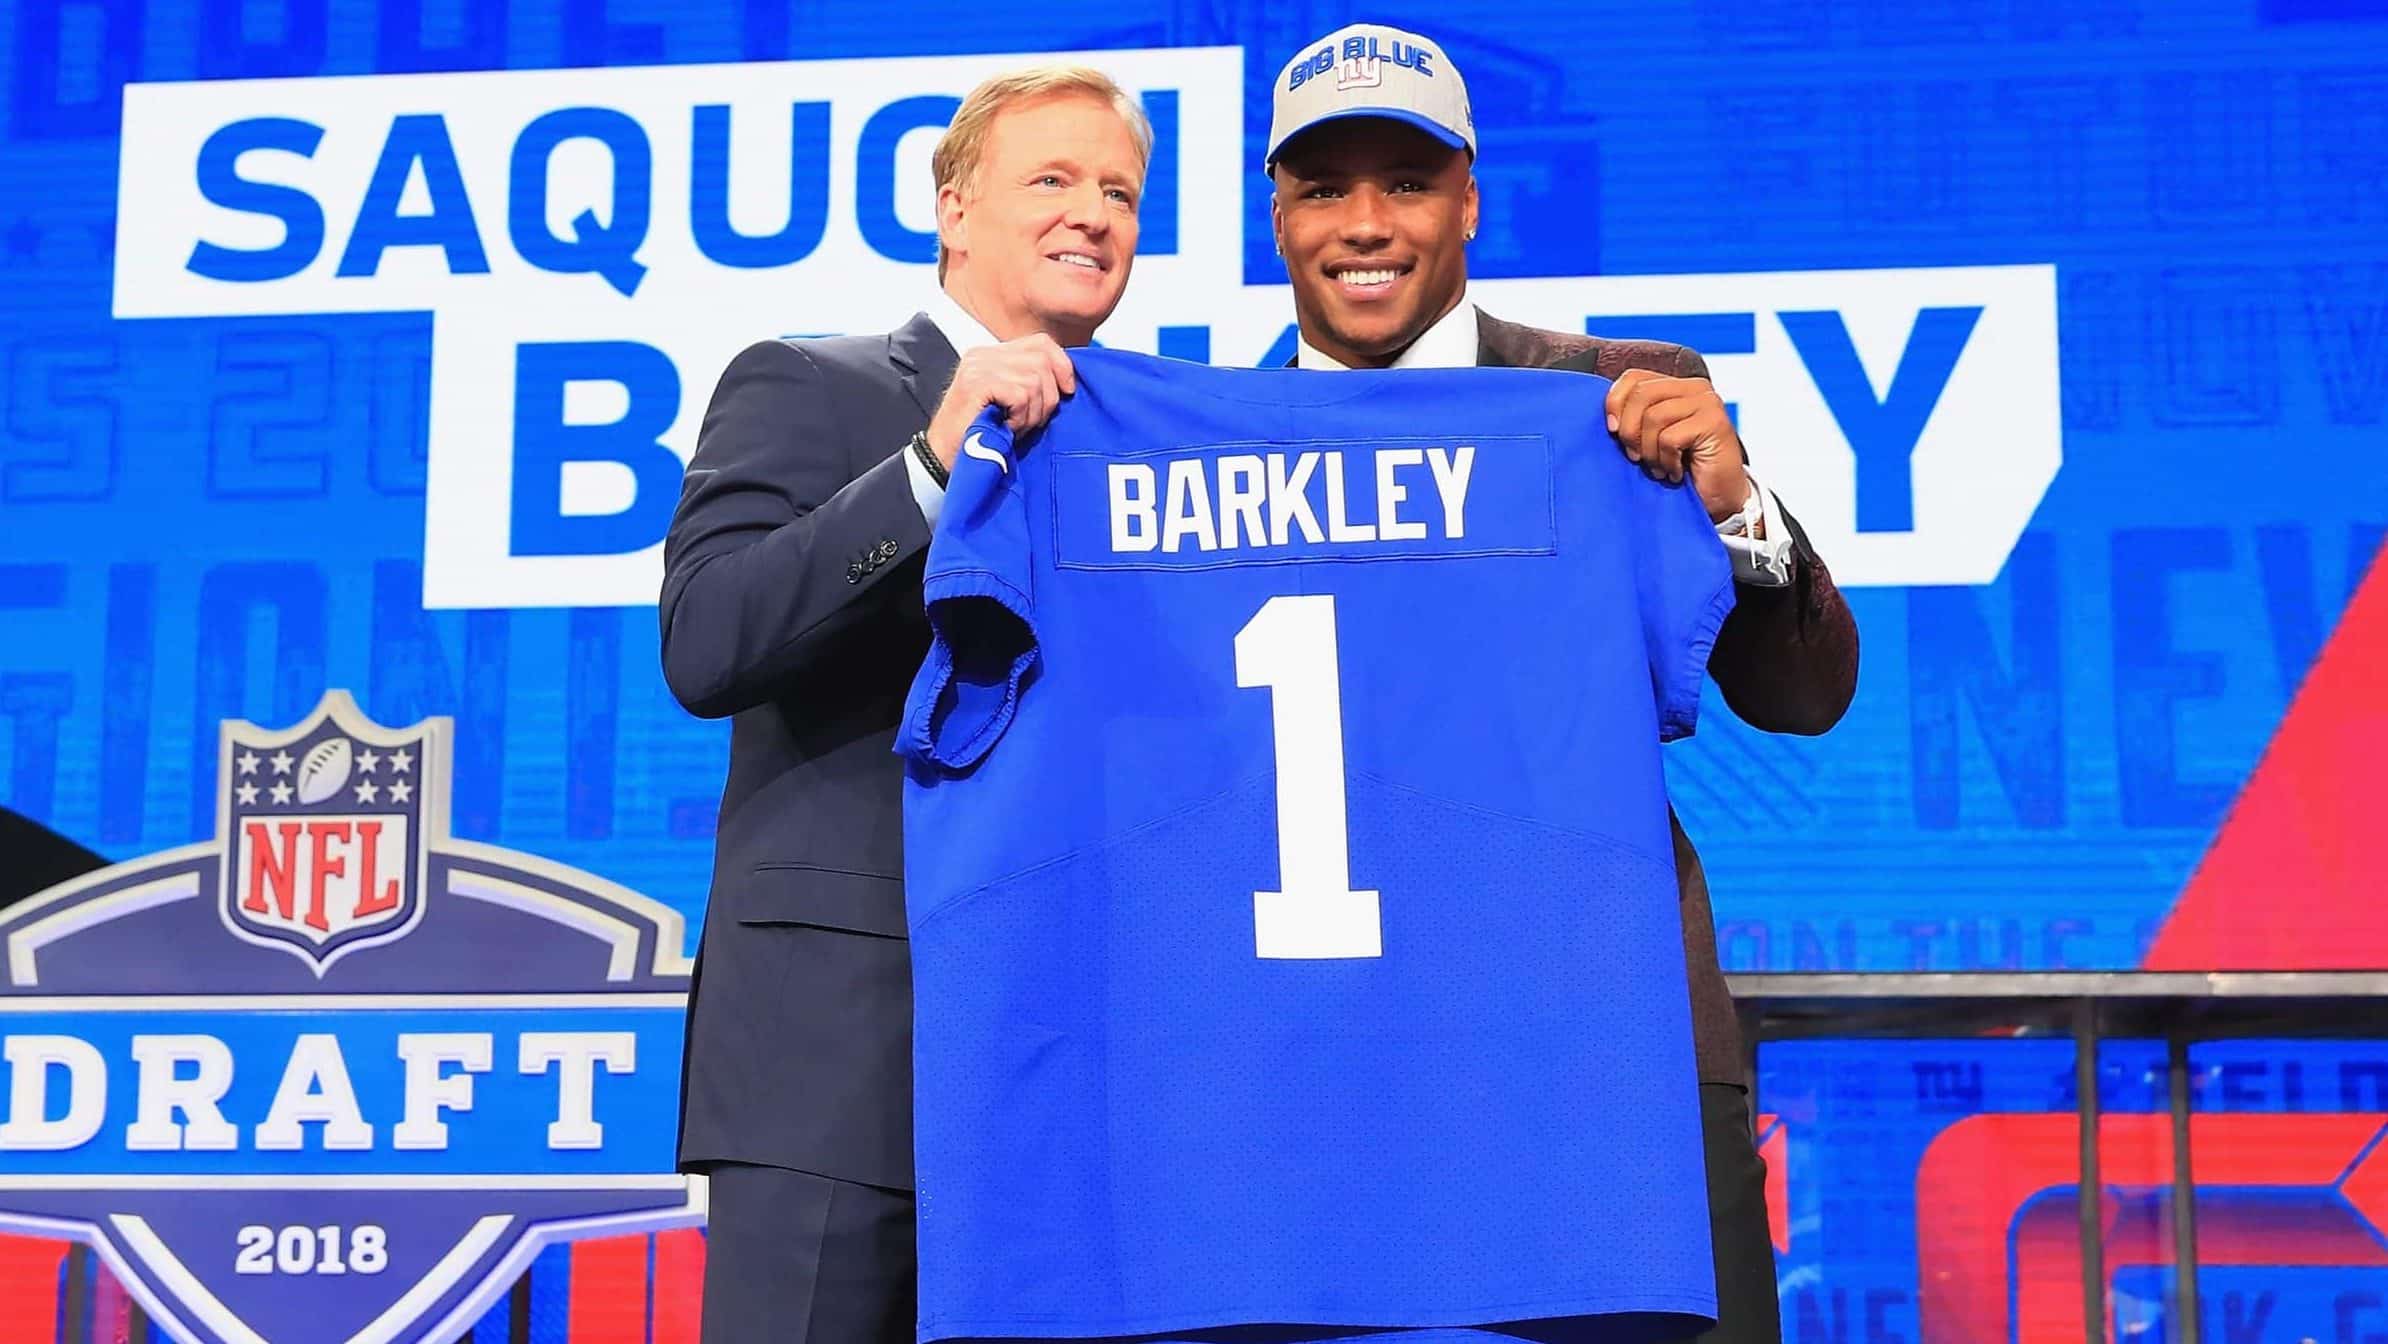 Giants RB Saquon Barkley And His MASSIVE Quads Featured In 